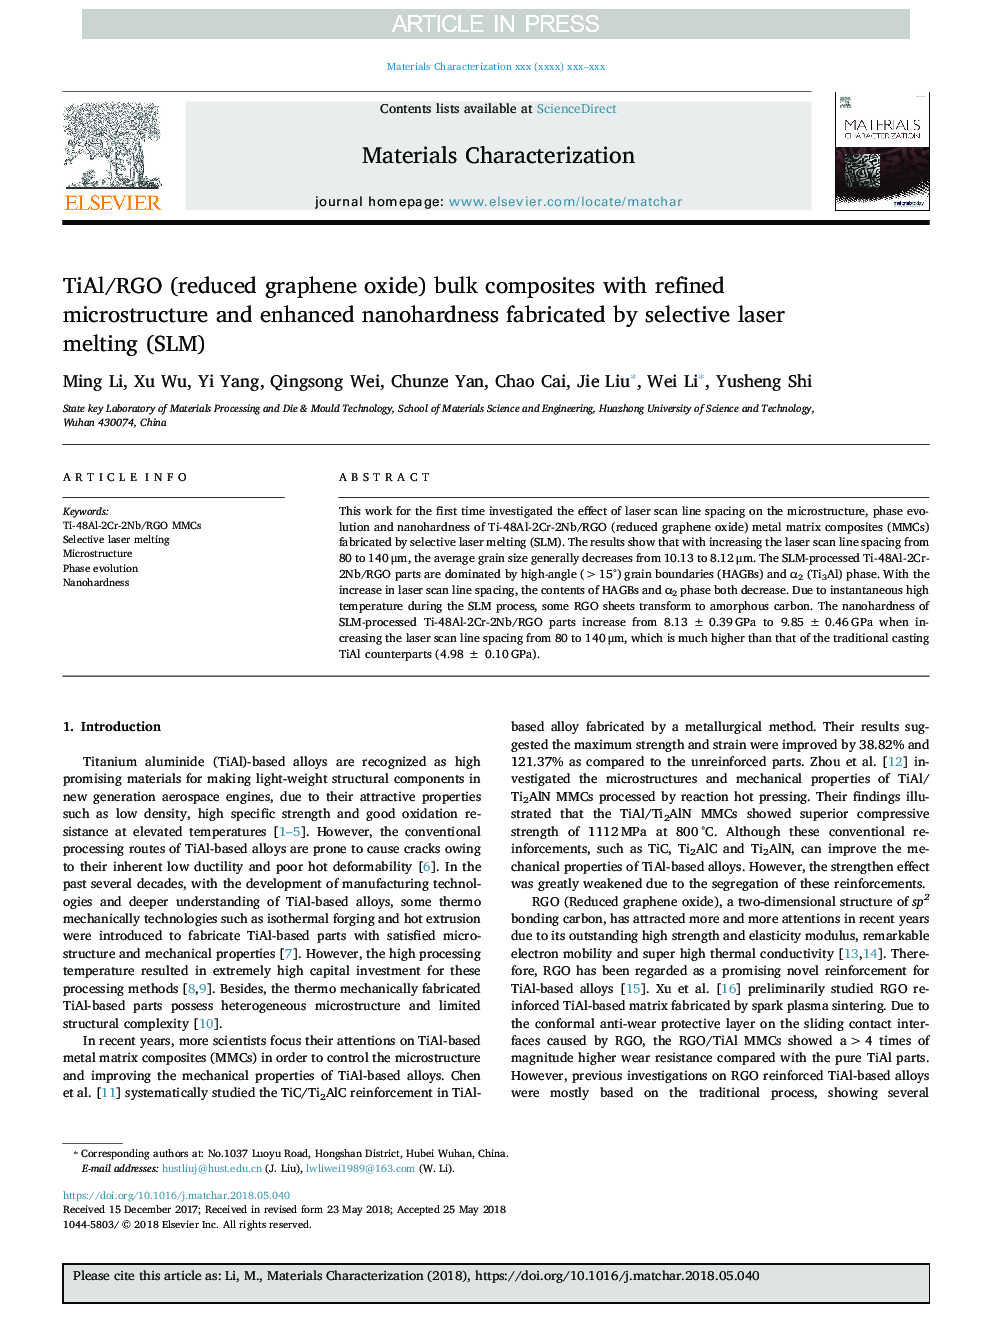 TiAl/RGO (reduced graphene oxide) bulk composites with refined microstructure and enhanced nanohardness fabricated by selective laser melting (SLM)